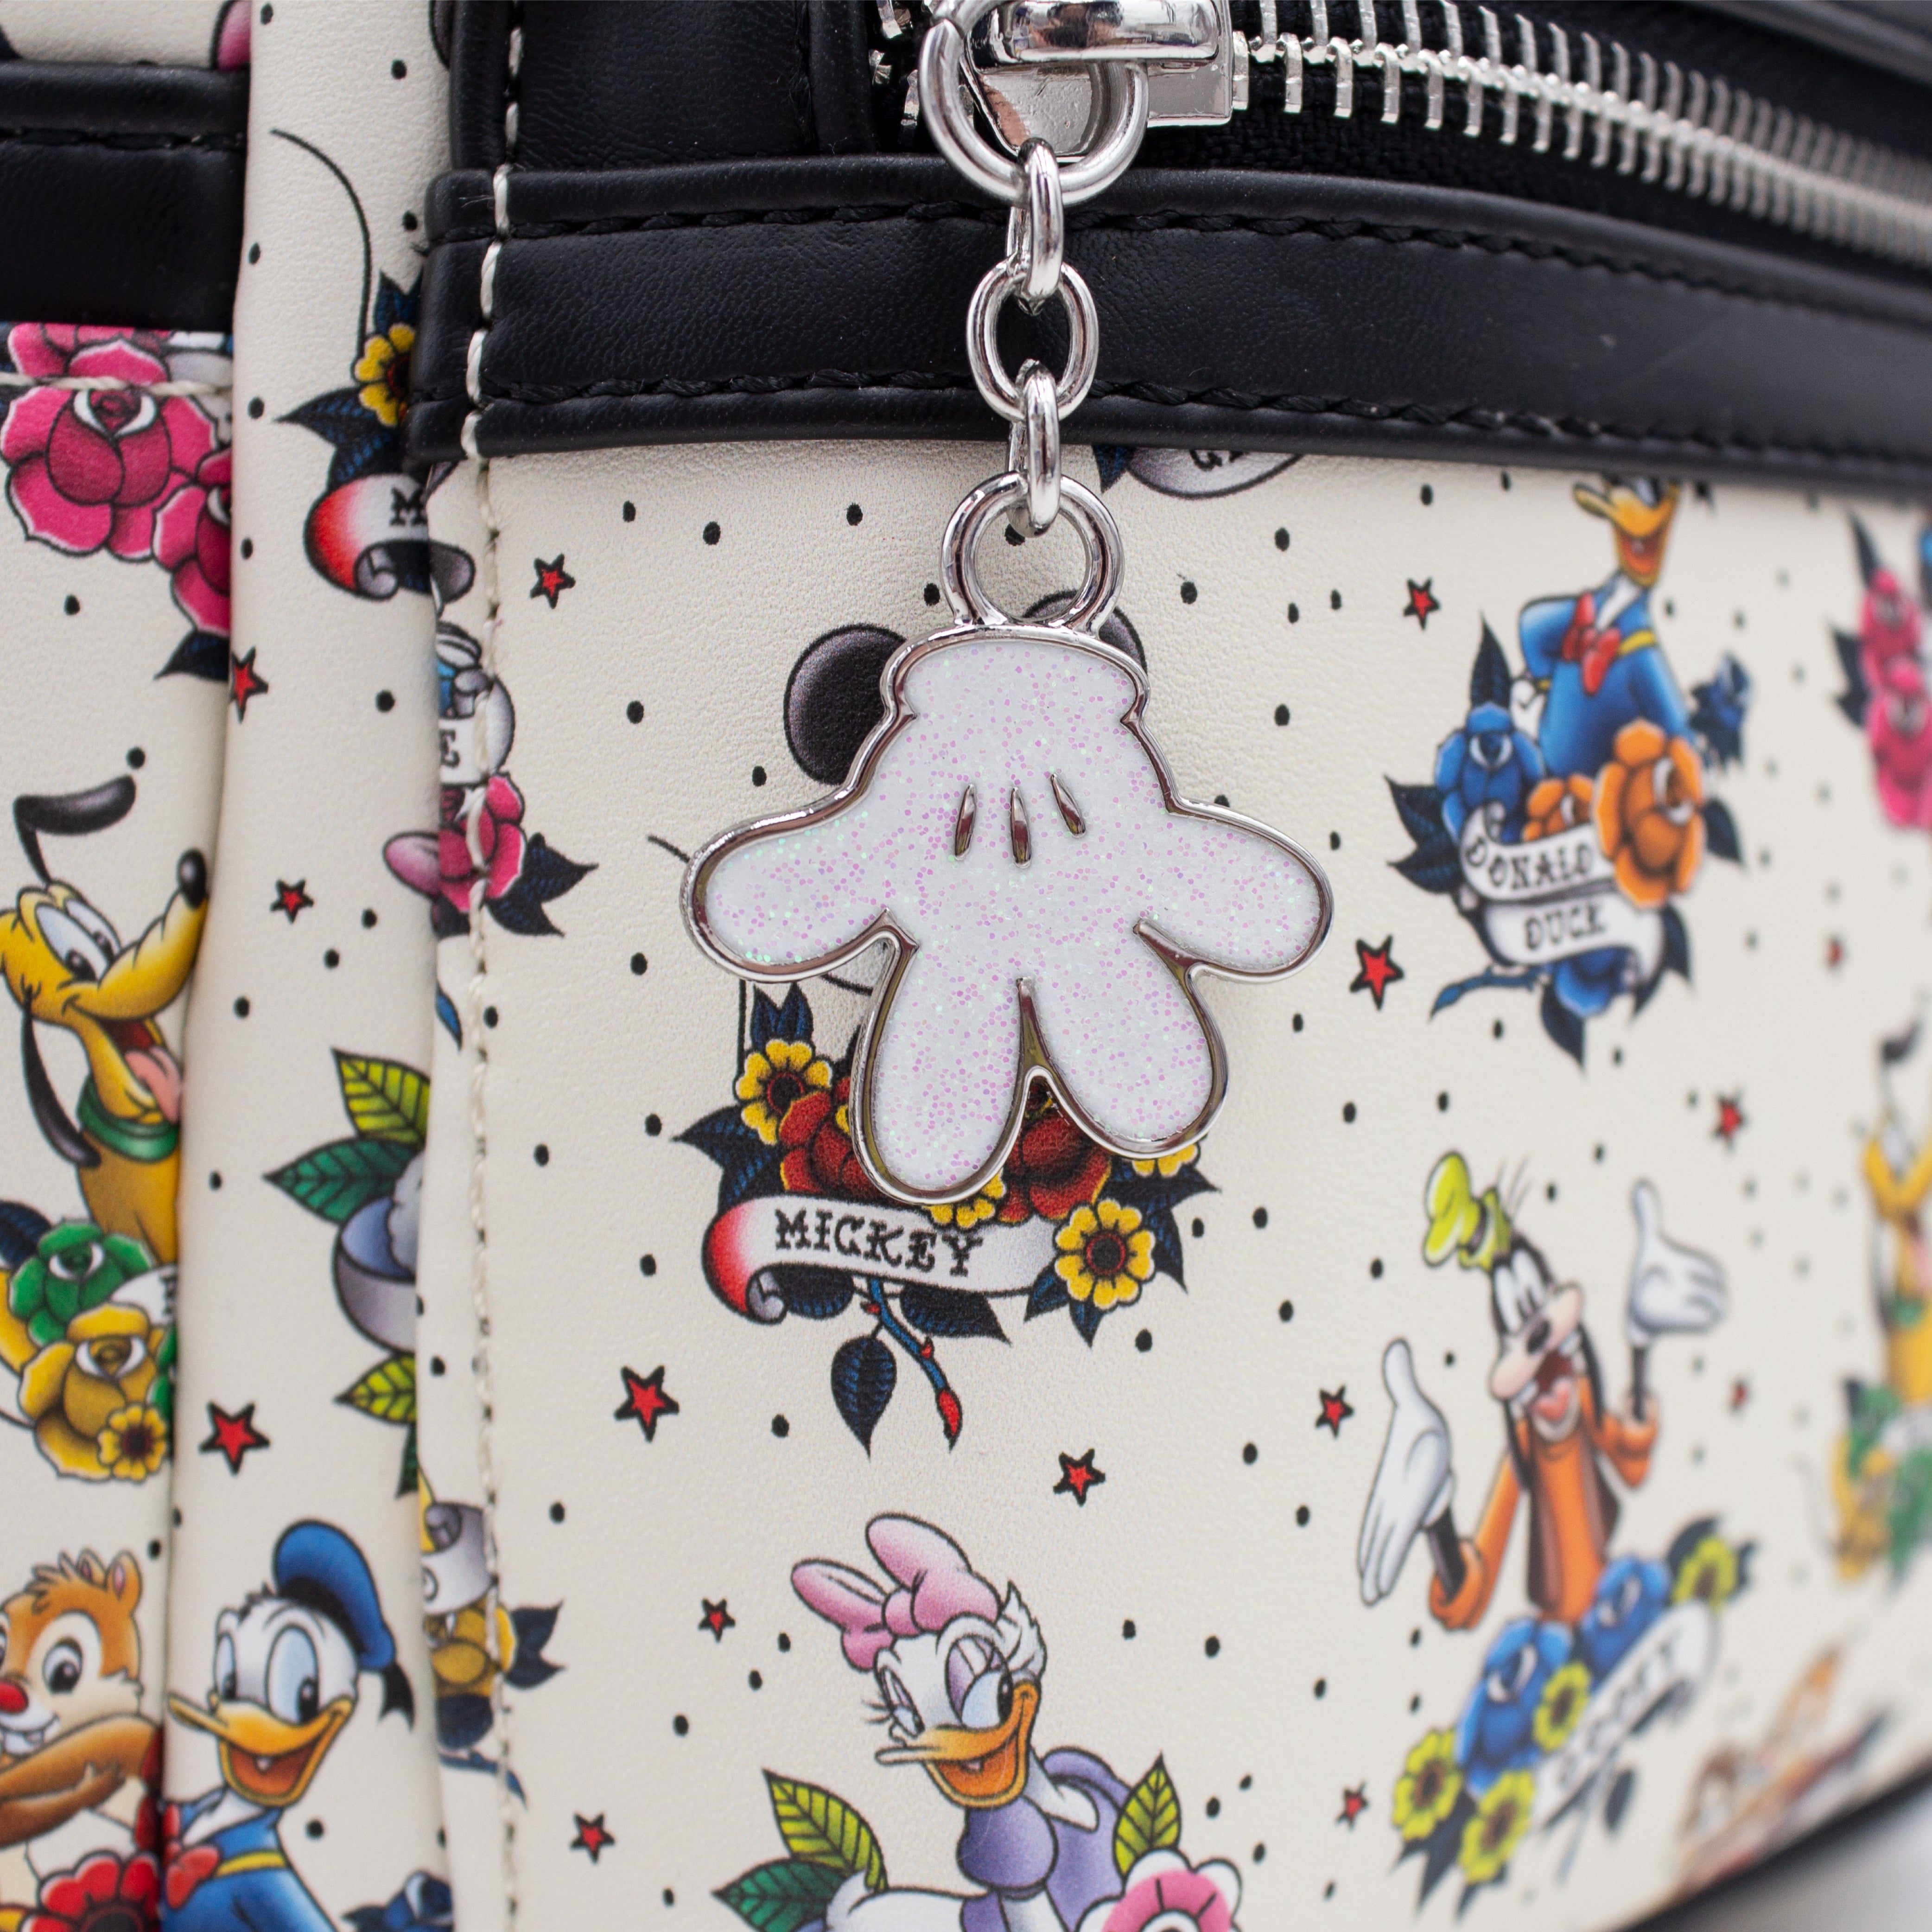 Mickey & Minnie Car Ride Loungefly Mini Backpack Exclusive!